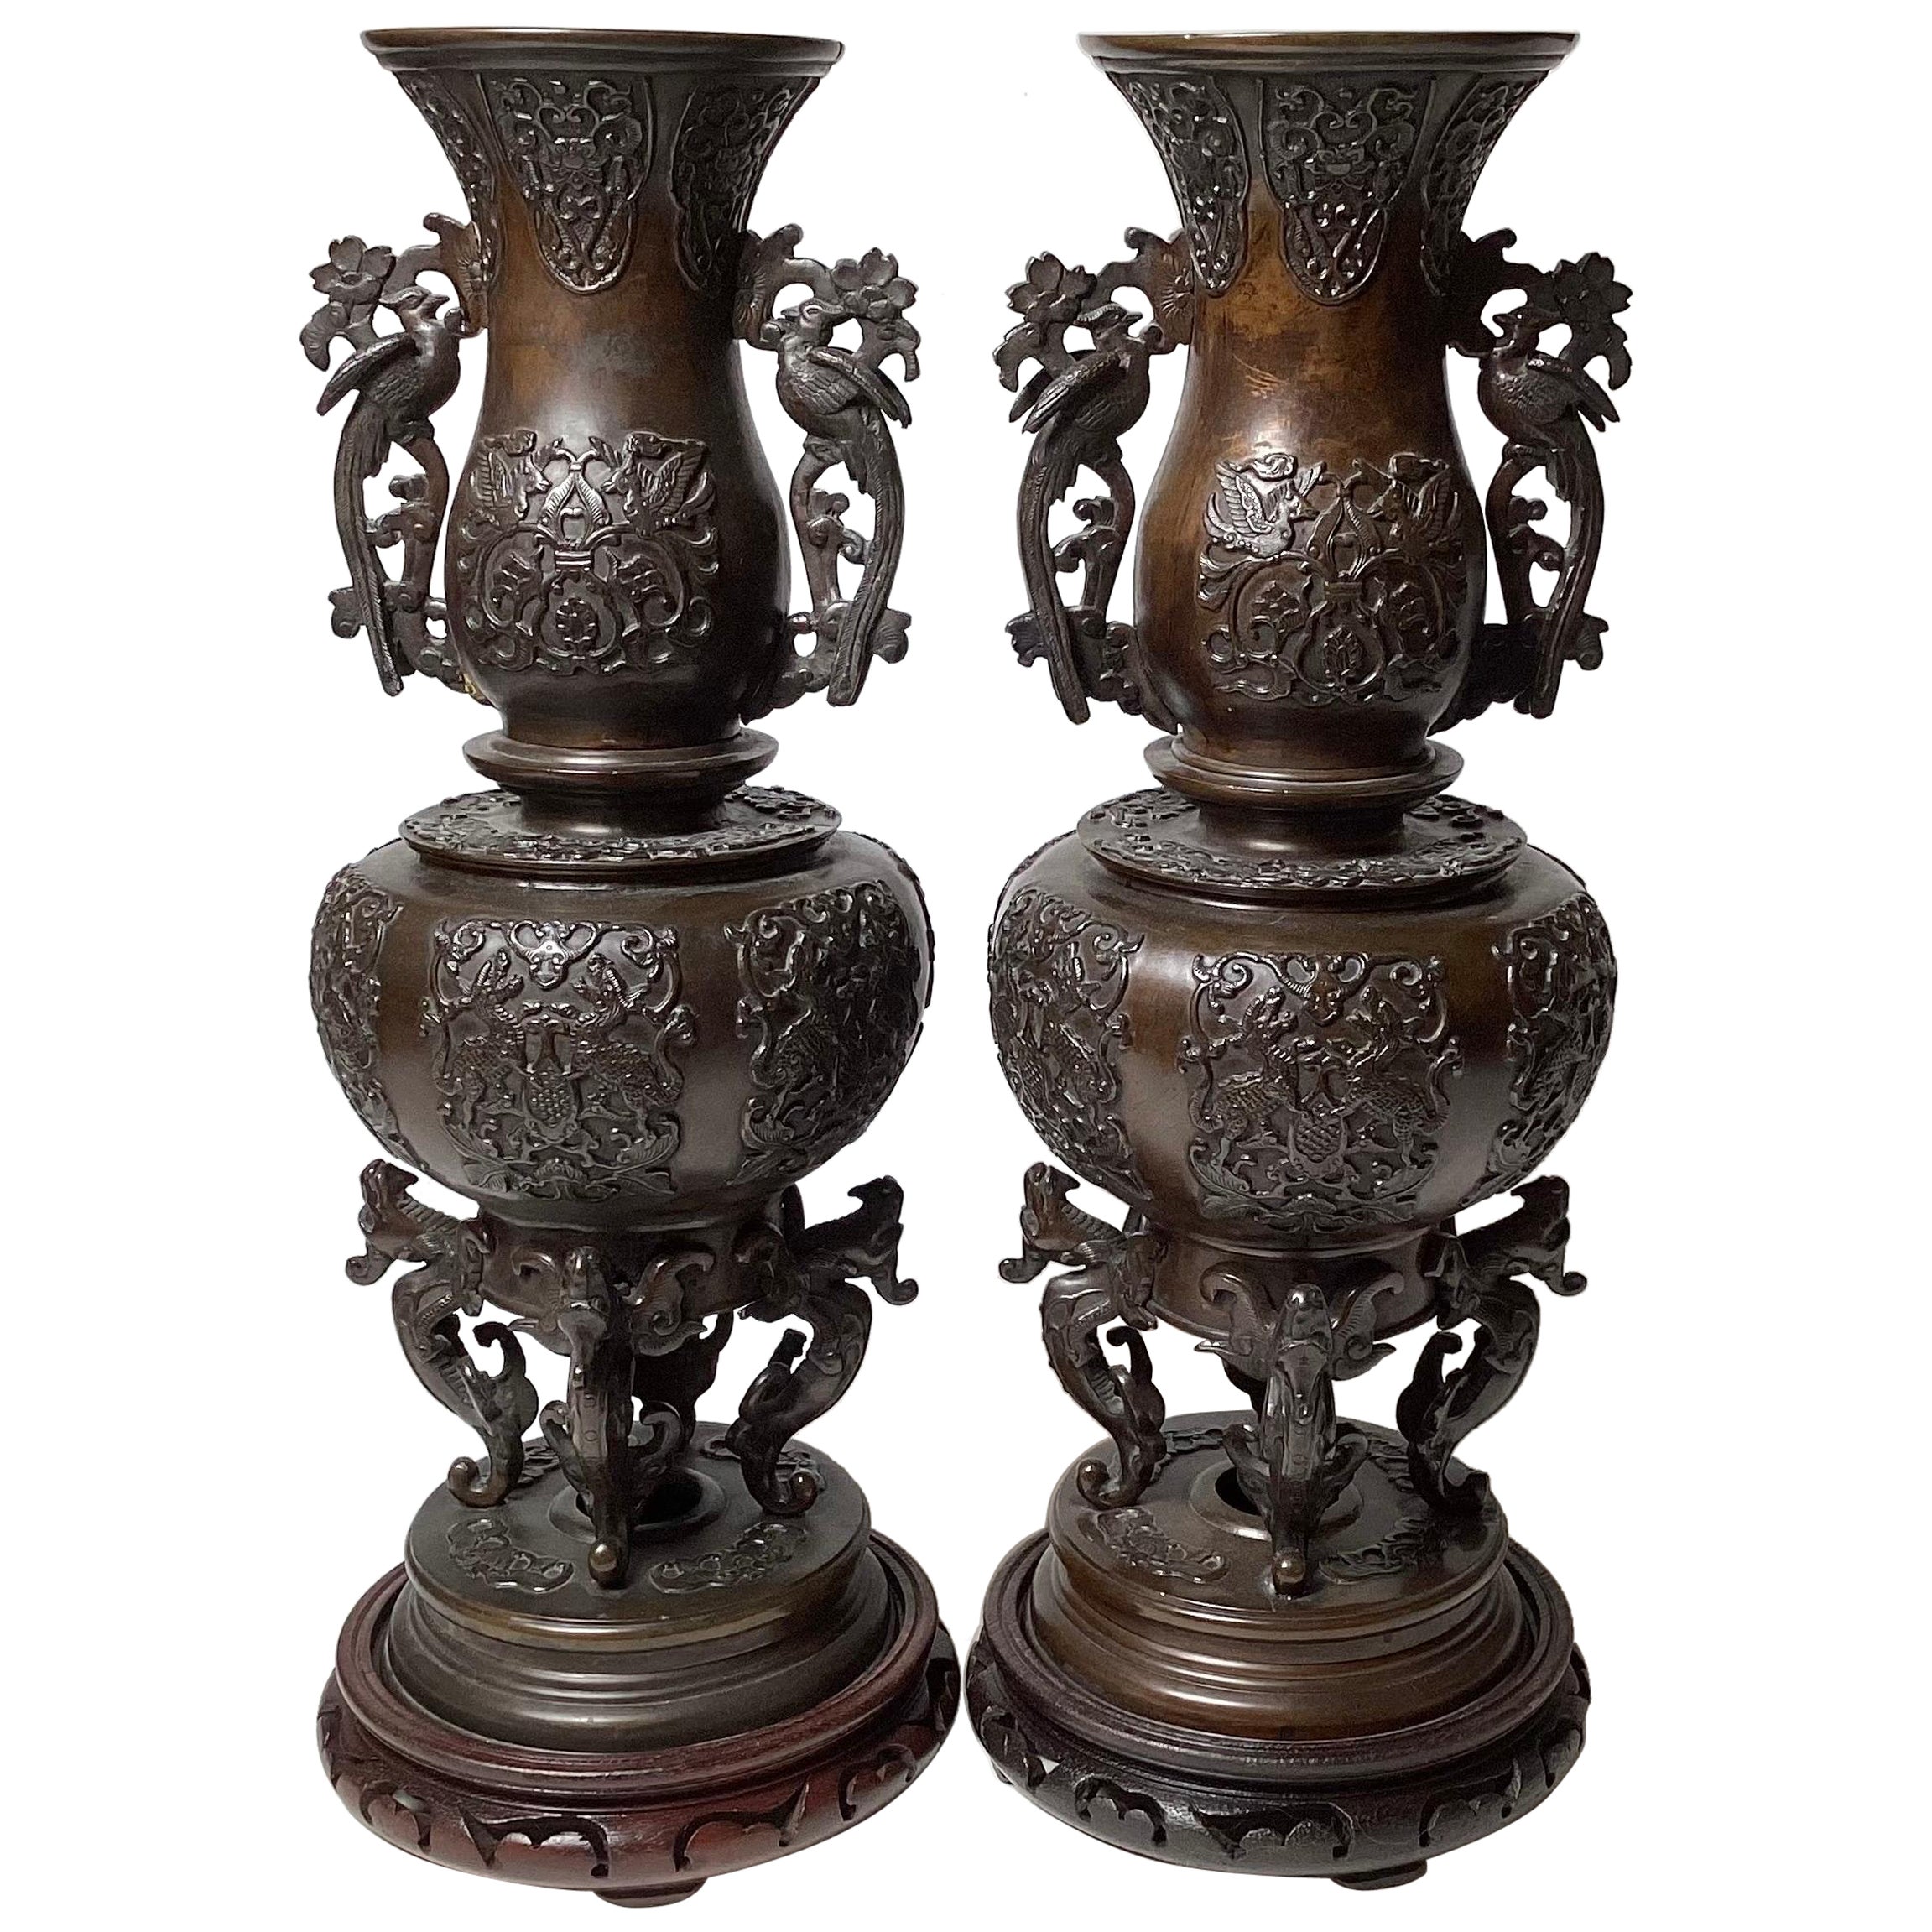 A Pair of Patinated Bronze Meiji Period Figural Tall Vases 